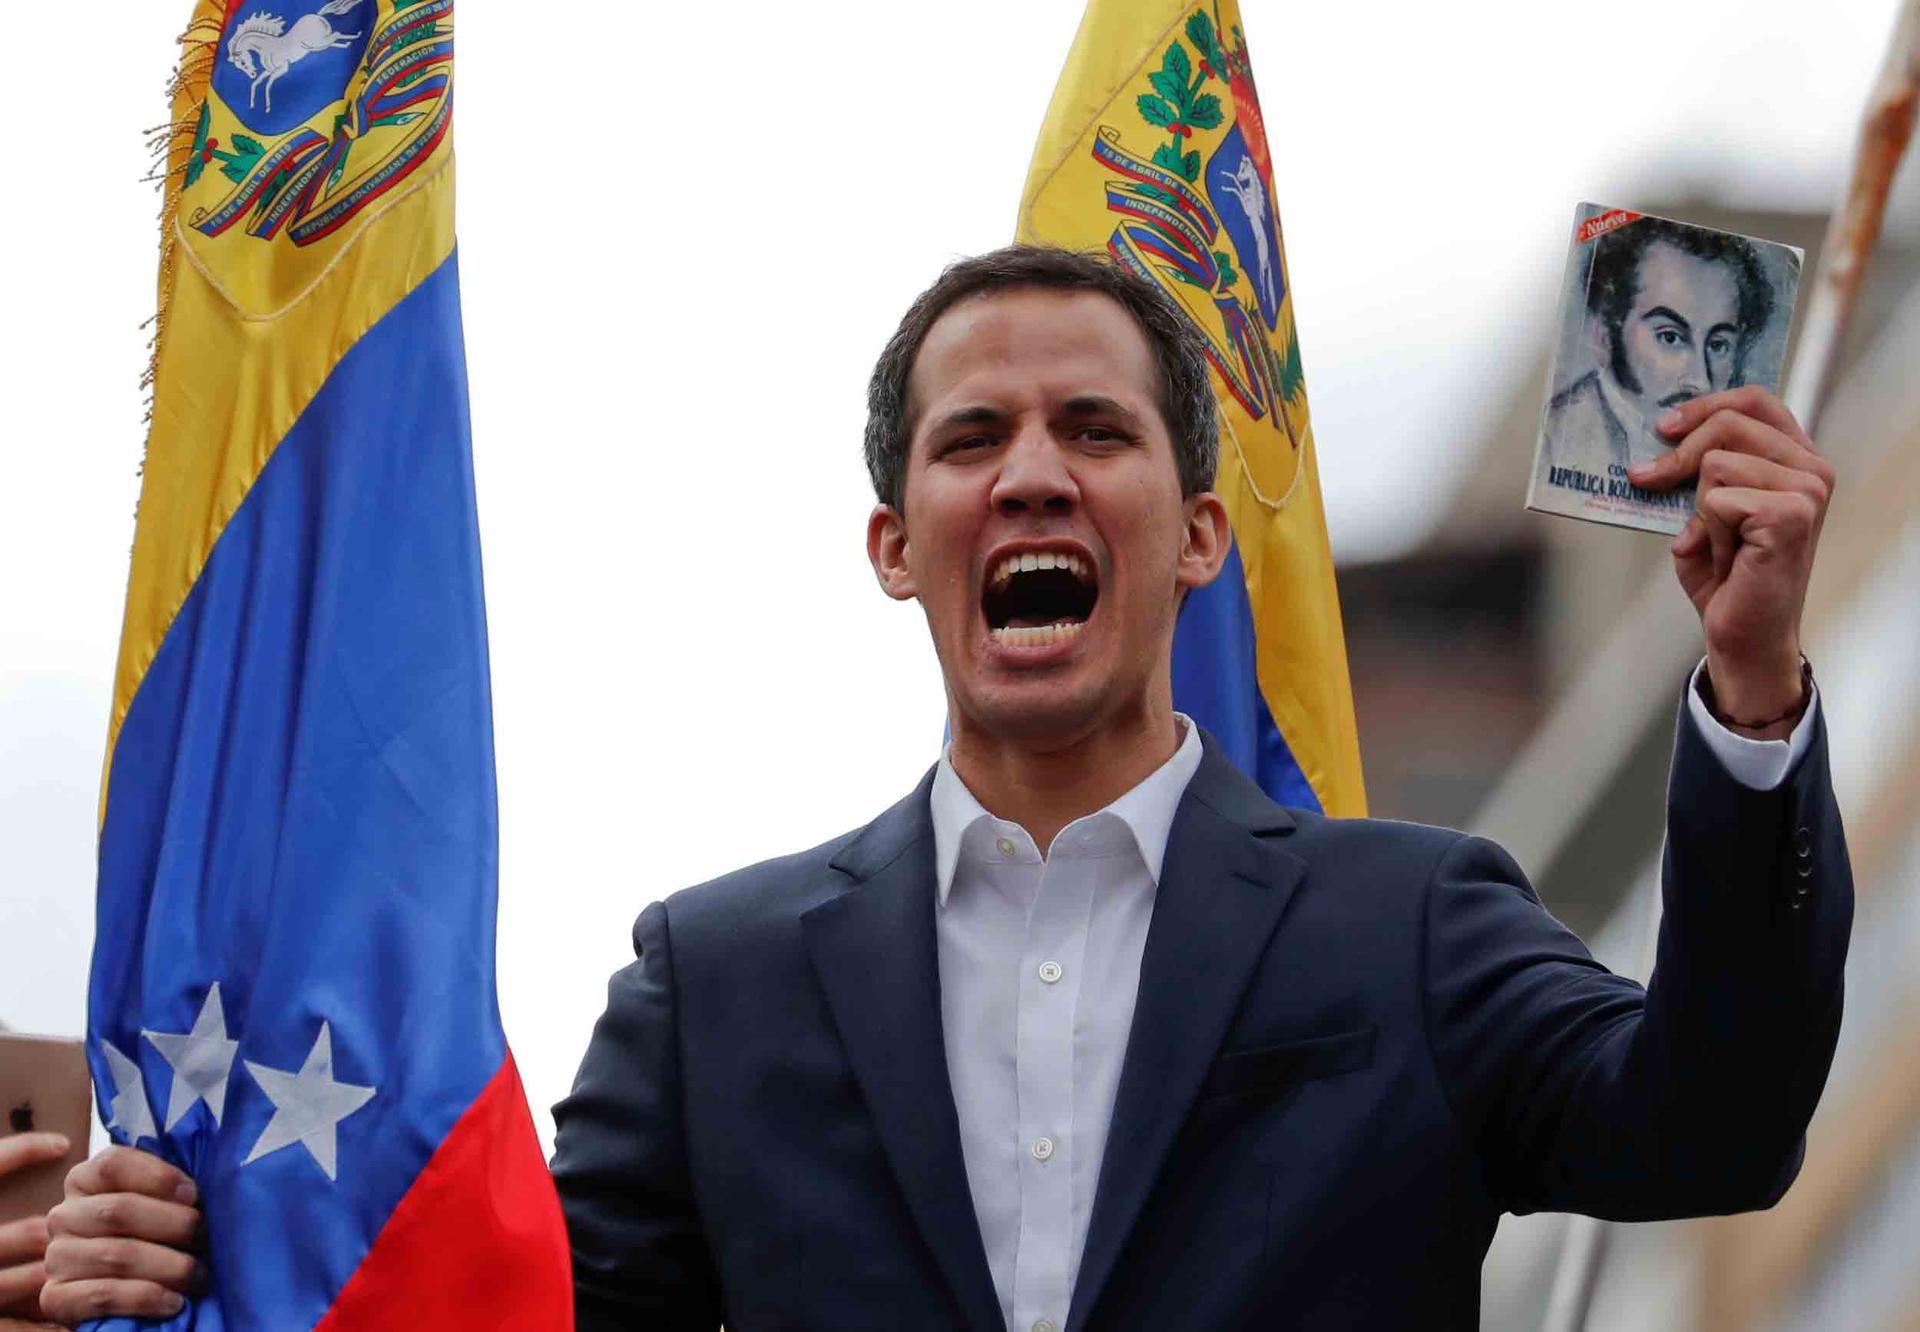 Opposition leader Juan Guaidó holds a Venezuelan flag in his right had and a small book, the constitution, in his left.